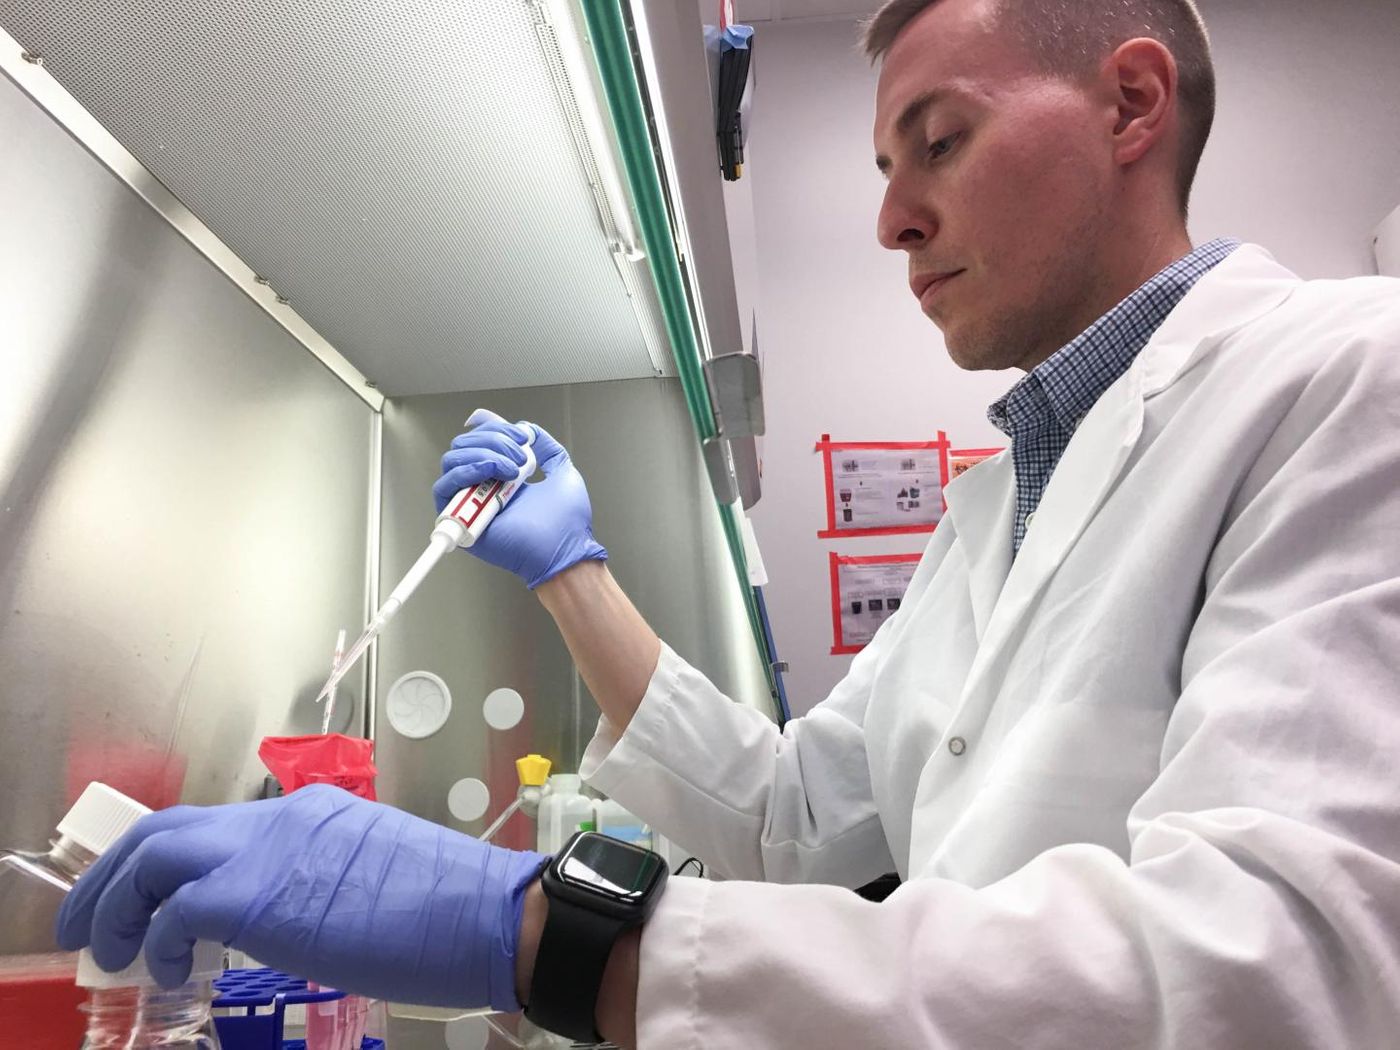 Jacob Yount conducts lab research at The Ohio State University College of Medicine. Yount led a new study that links heart complications from the flu with a common gene mutation. / Credit: The Ohio State University Wexner Medical Center